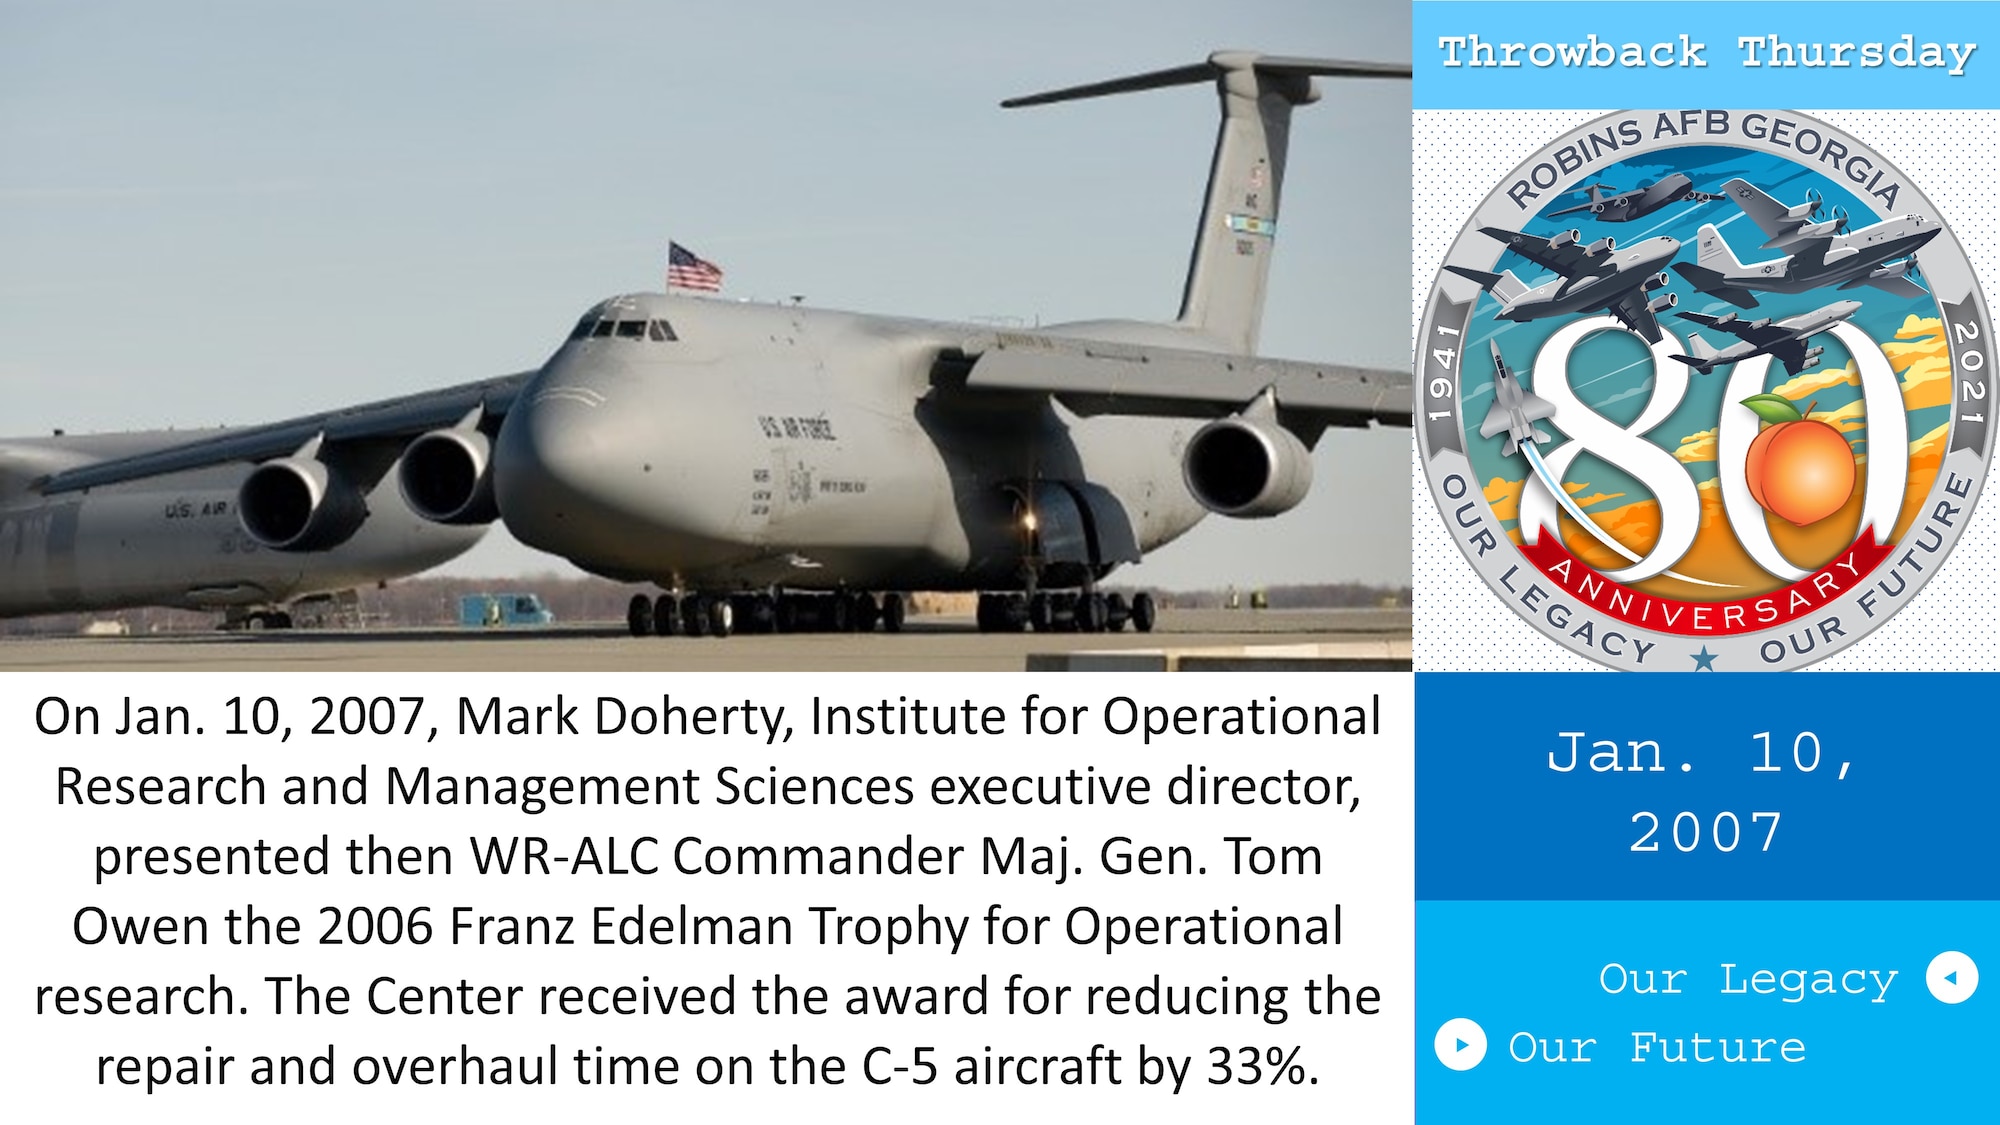 Graphic shows C-5 aircraft with throwback Thursday fact.